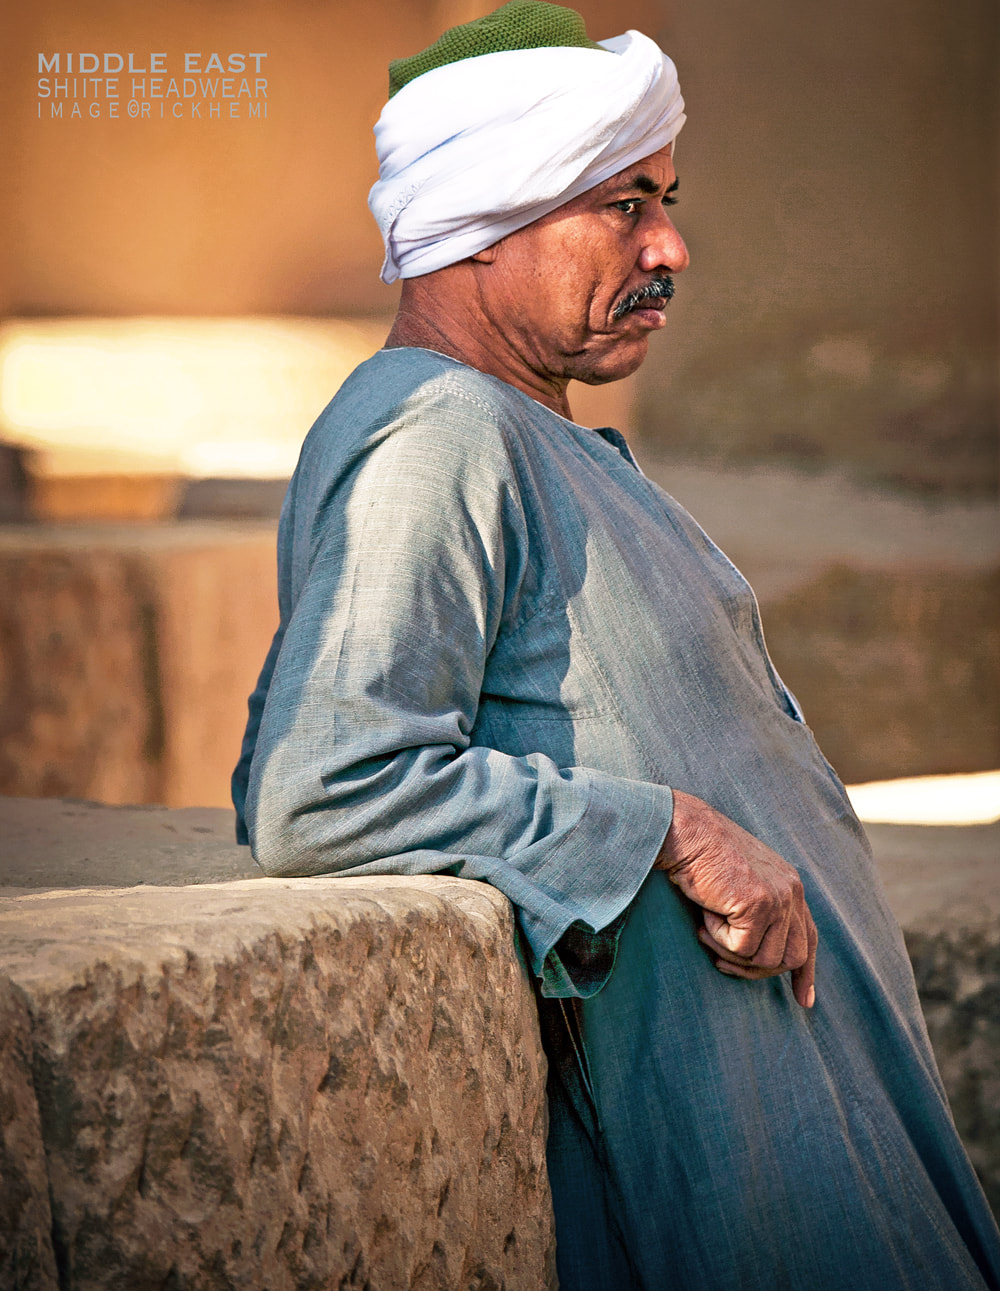 Middle East solo overland travel, Shiite headwear, image by Rick Hemi